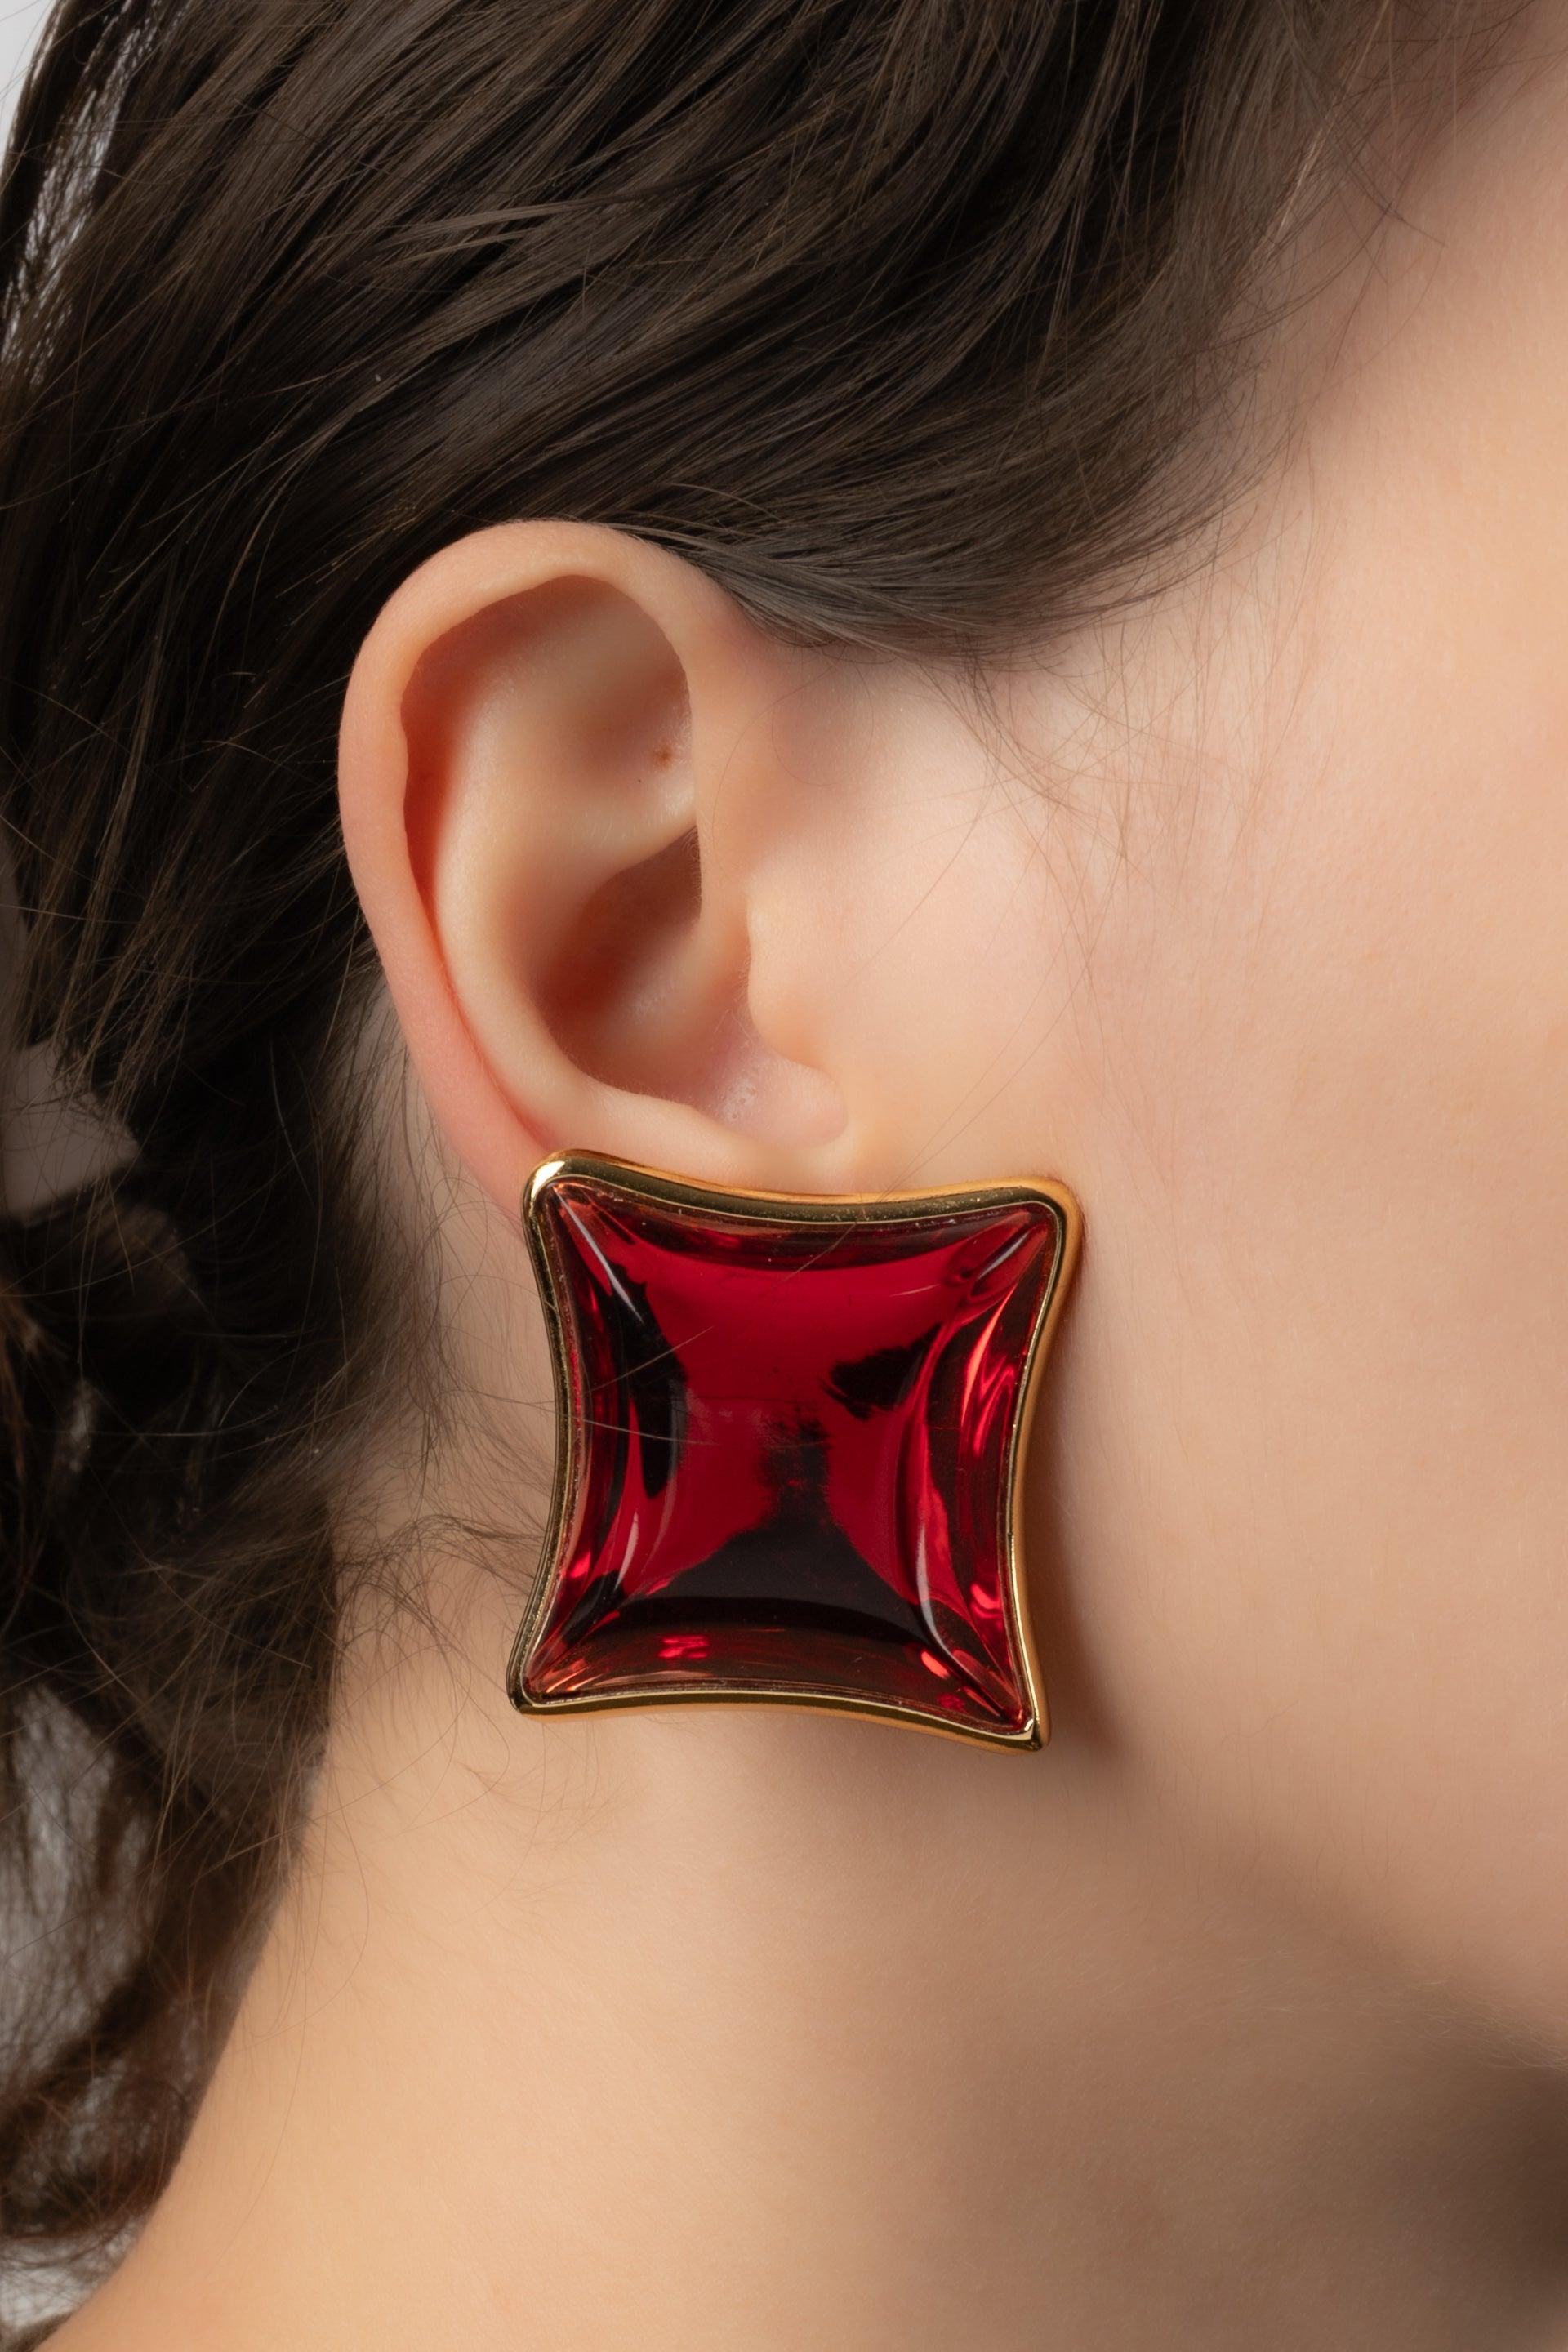 Yves Saint Laurent - (Made in France) Golden metal earrings with red resin.

Additional information:
Condition: Very good condition
Dimensions: Height: 3.5 cm

Seller Reference: BO51